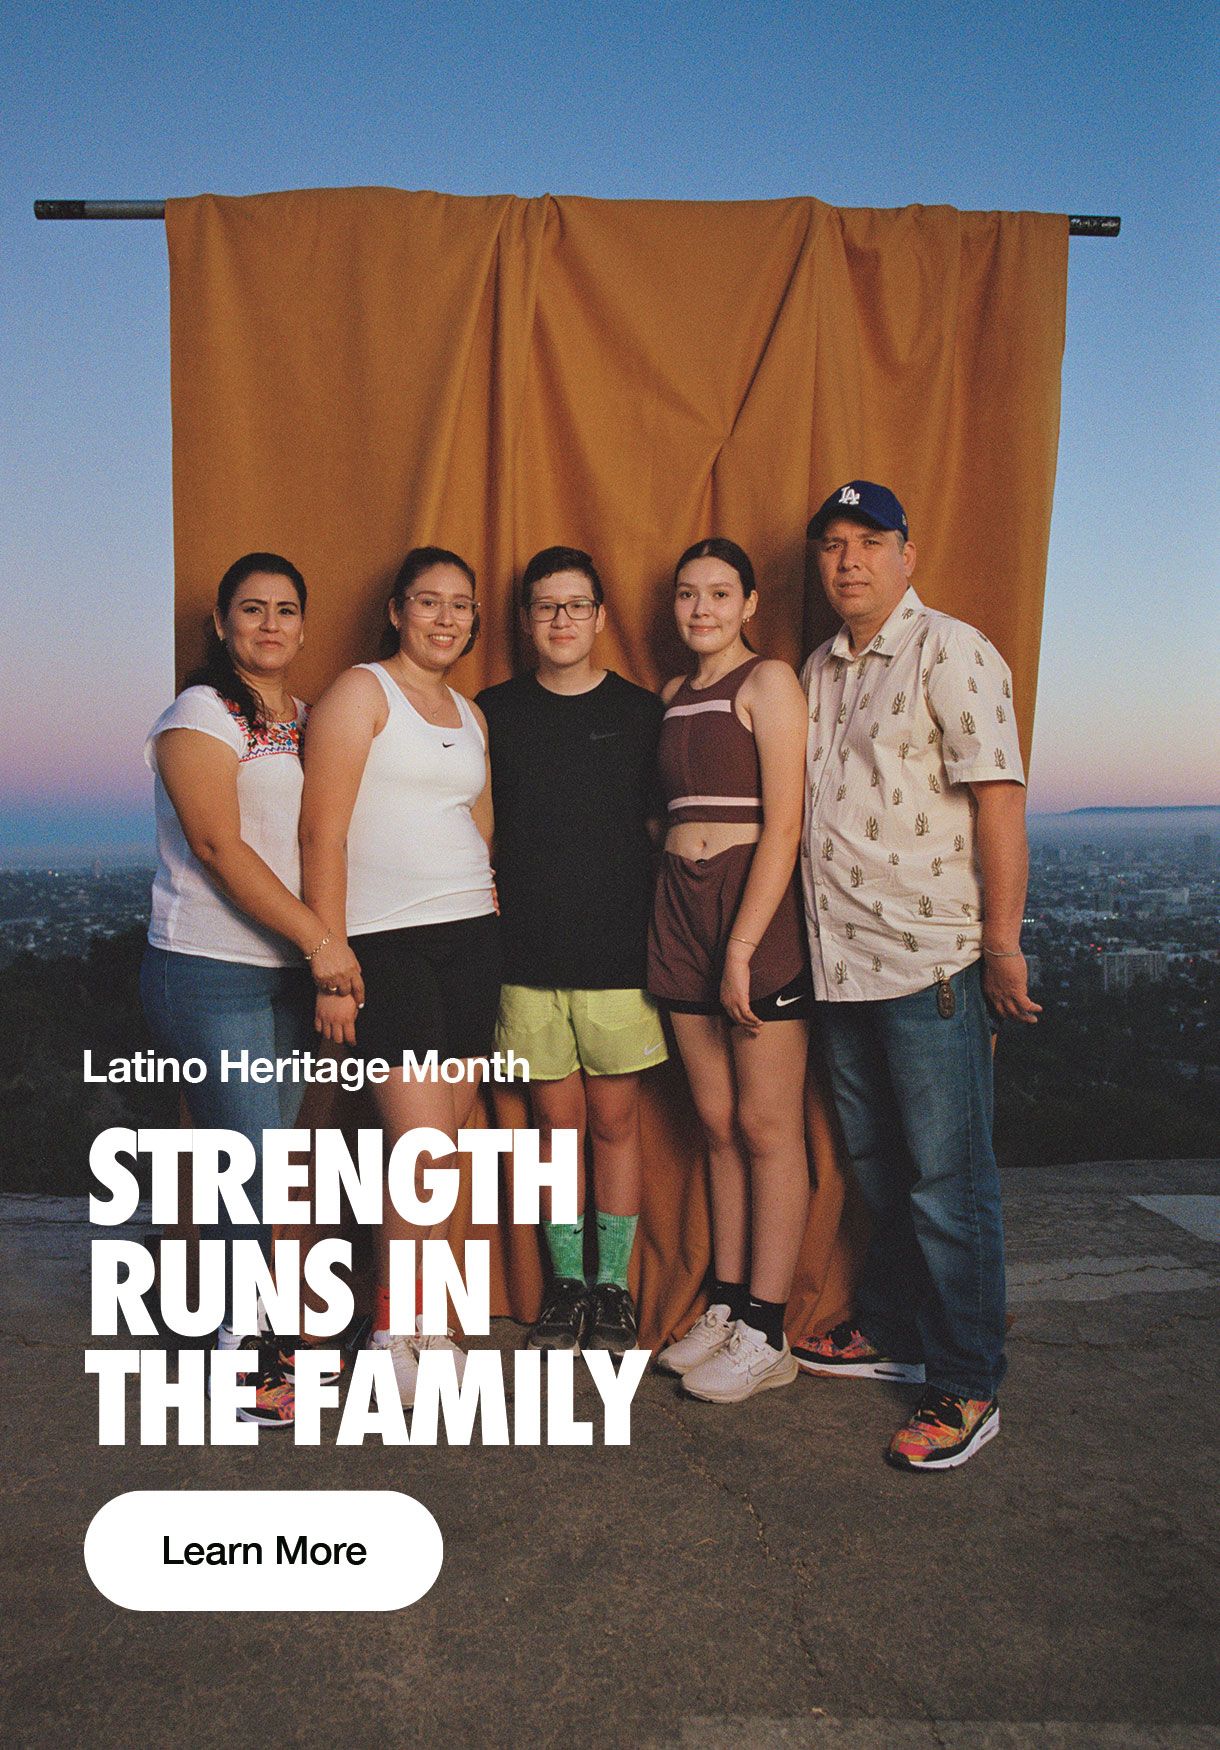 Latino Heritage Month - Strength runs in Family - Mexican family standing together